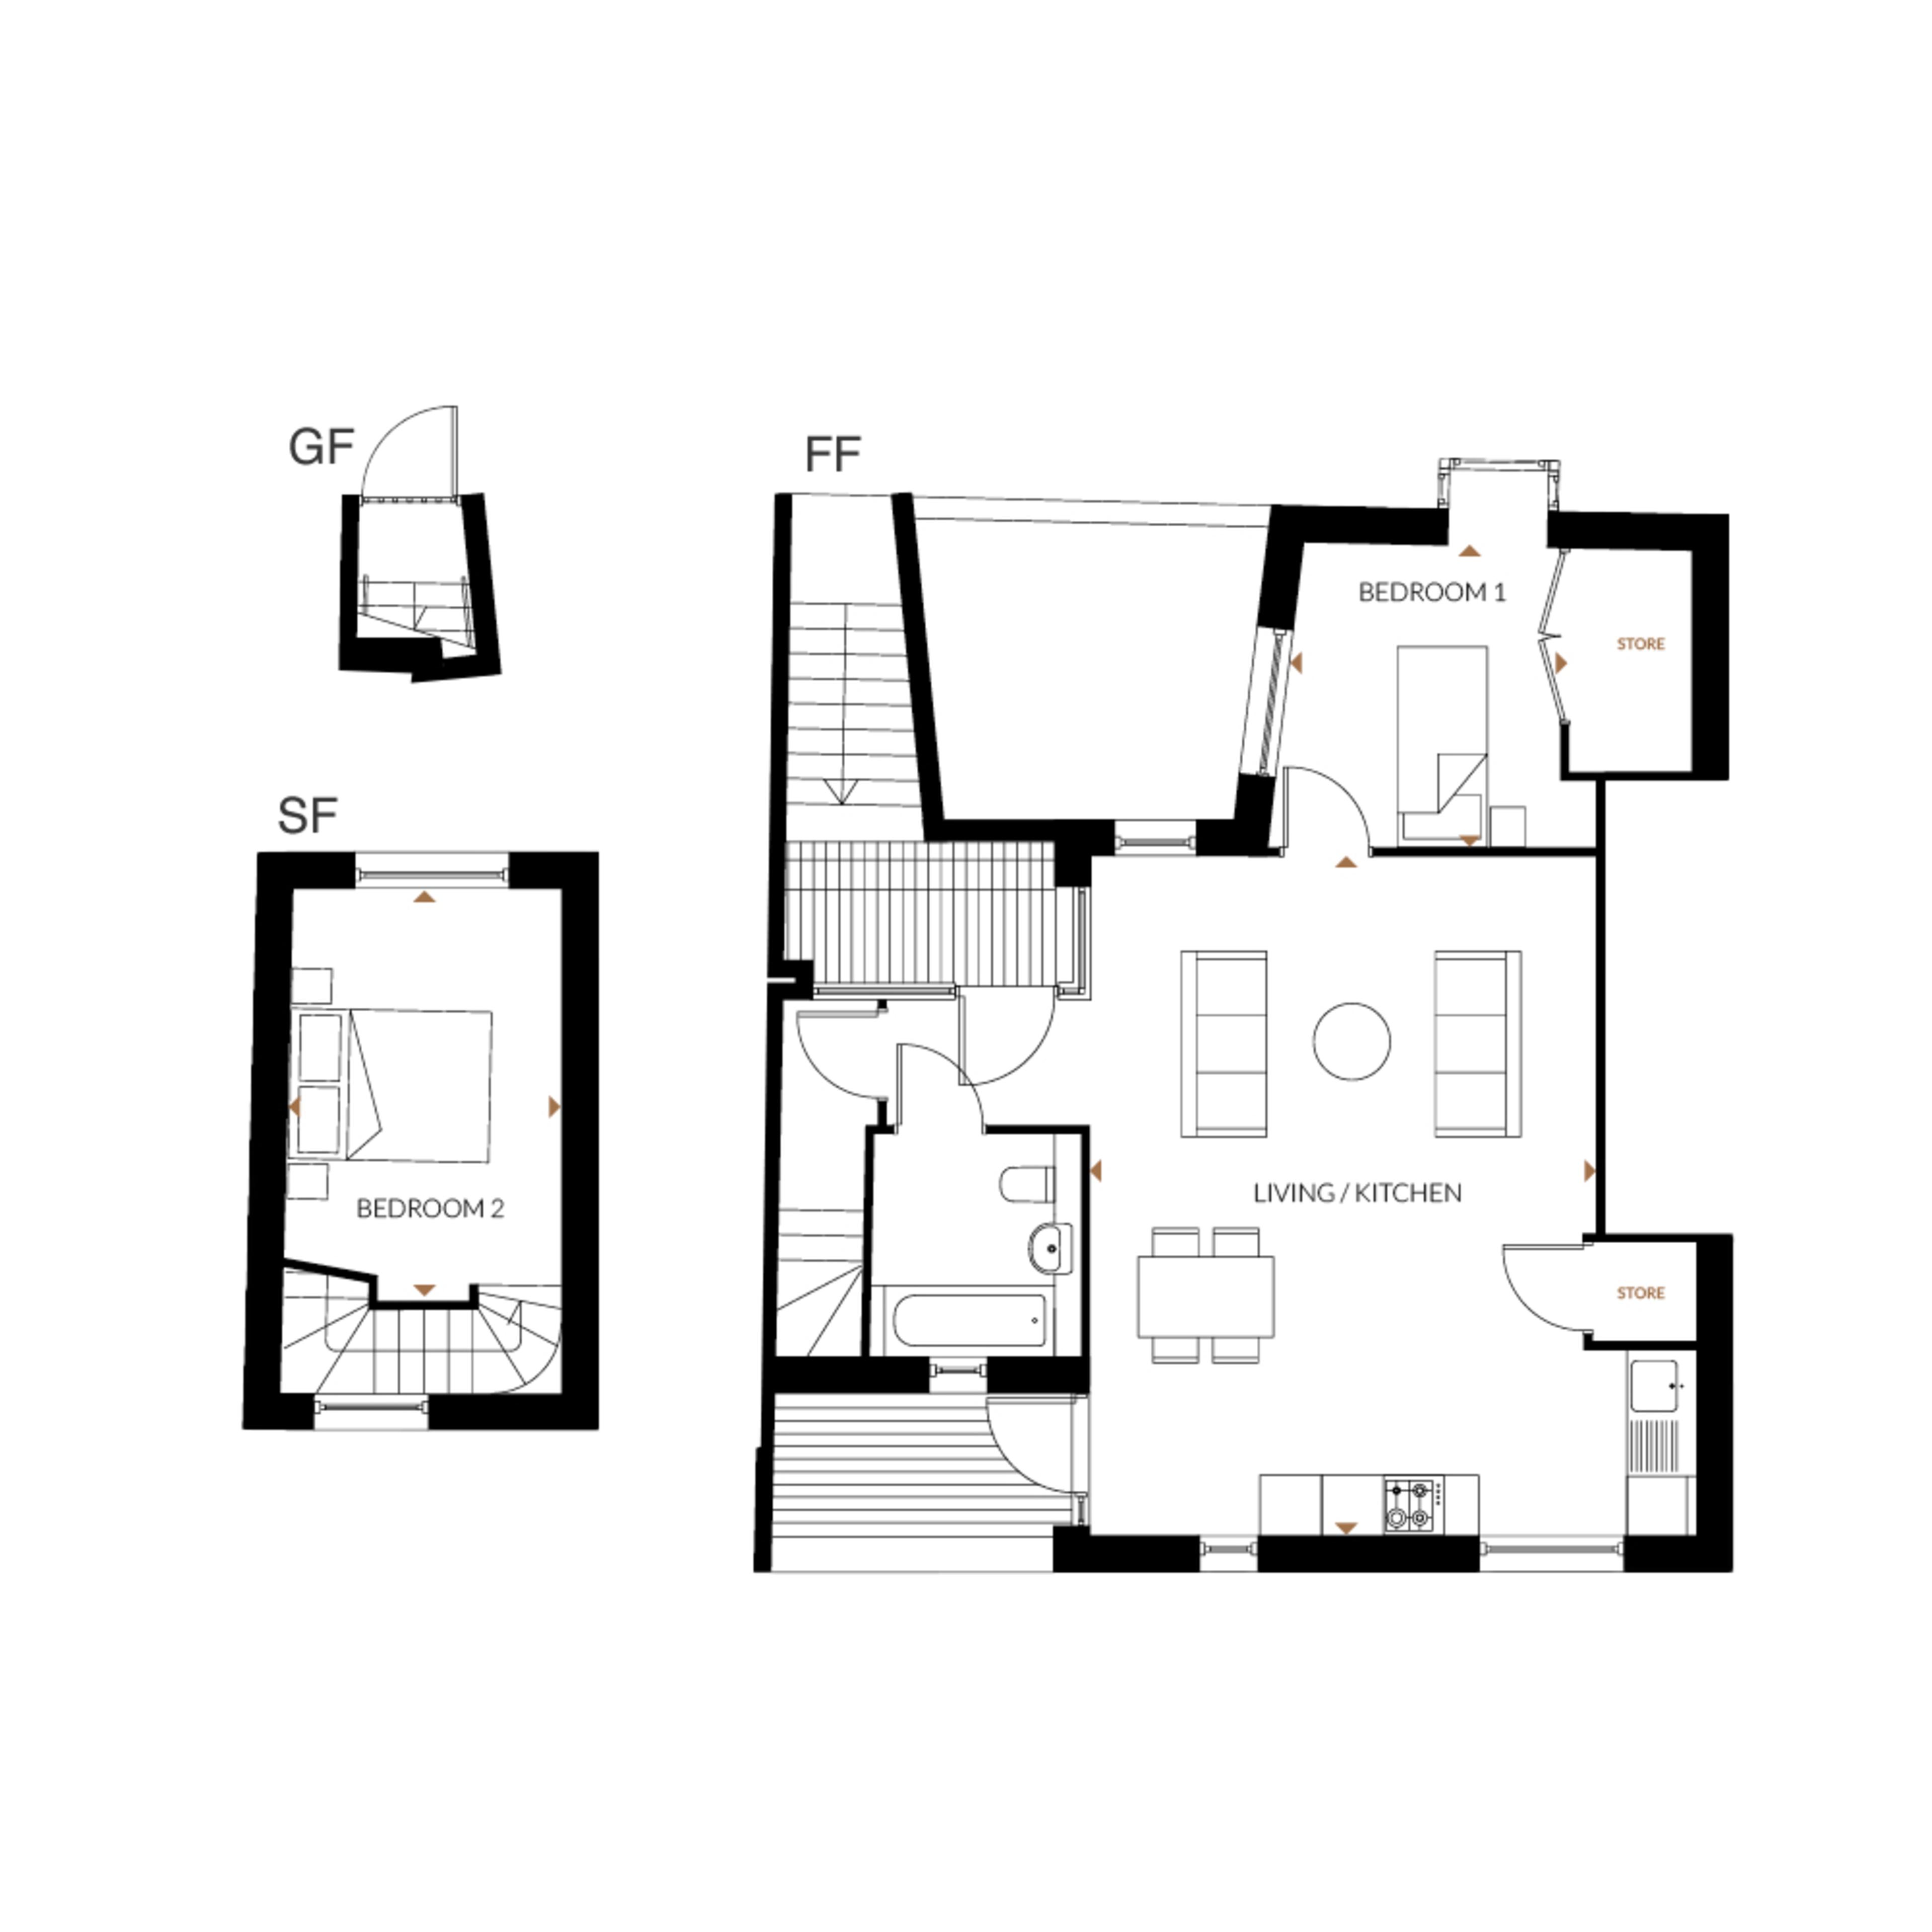 persona-homes-edgewood-mews-flats-for-sale-north-london-floorplan-2-bed-type-b